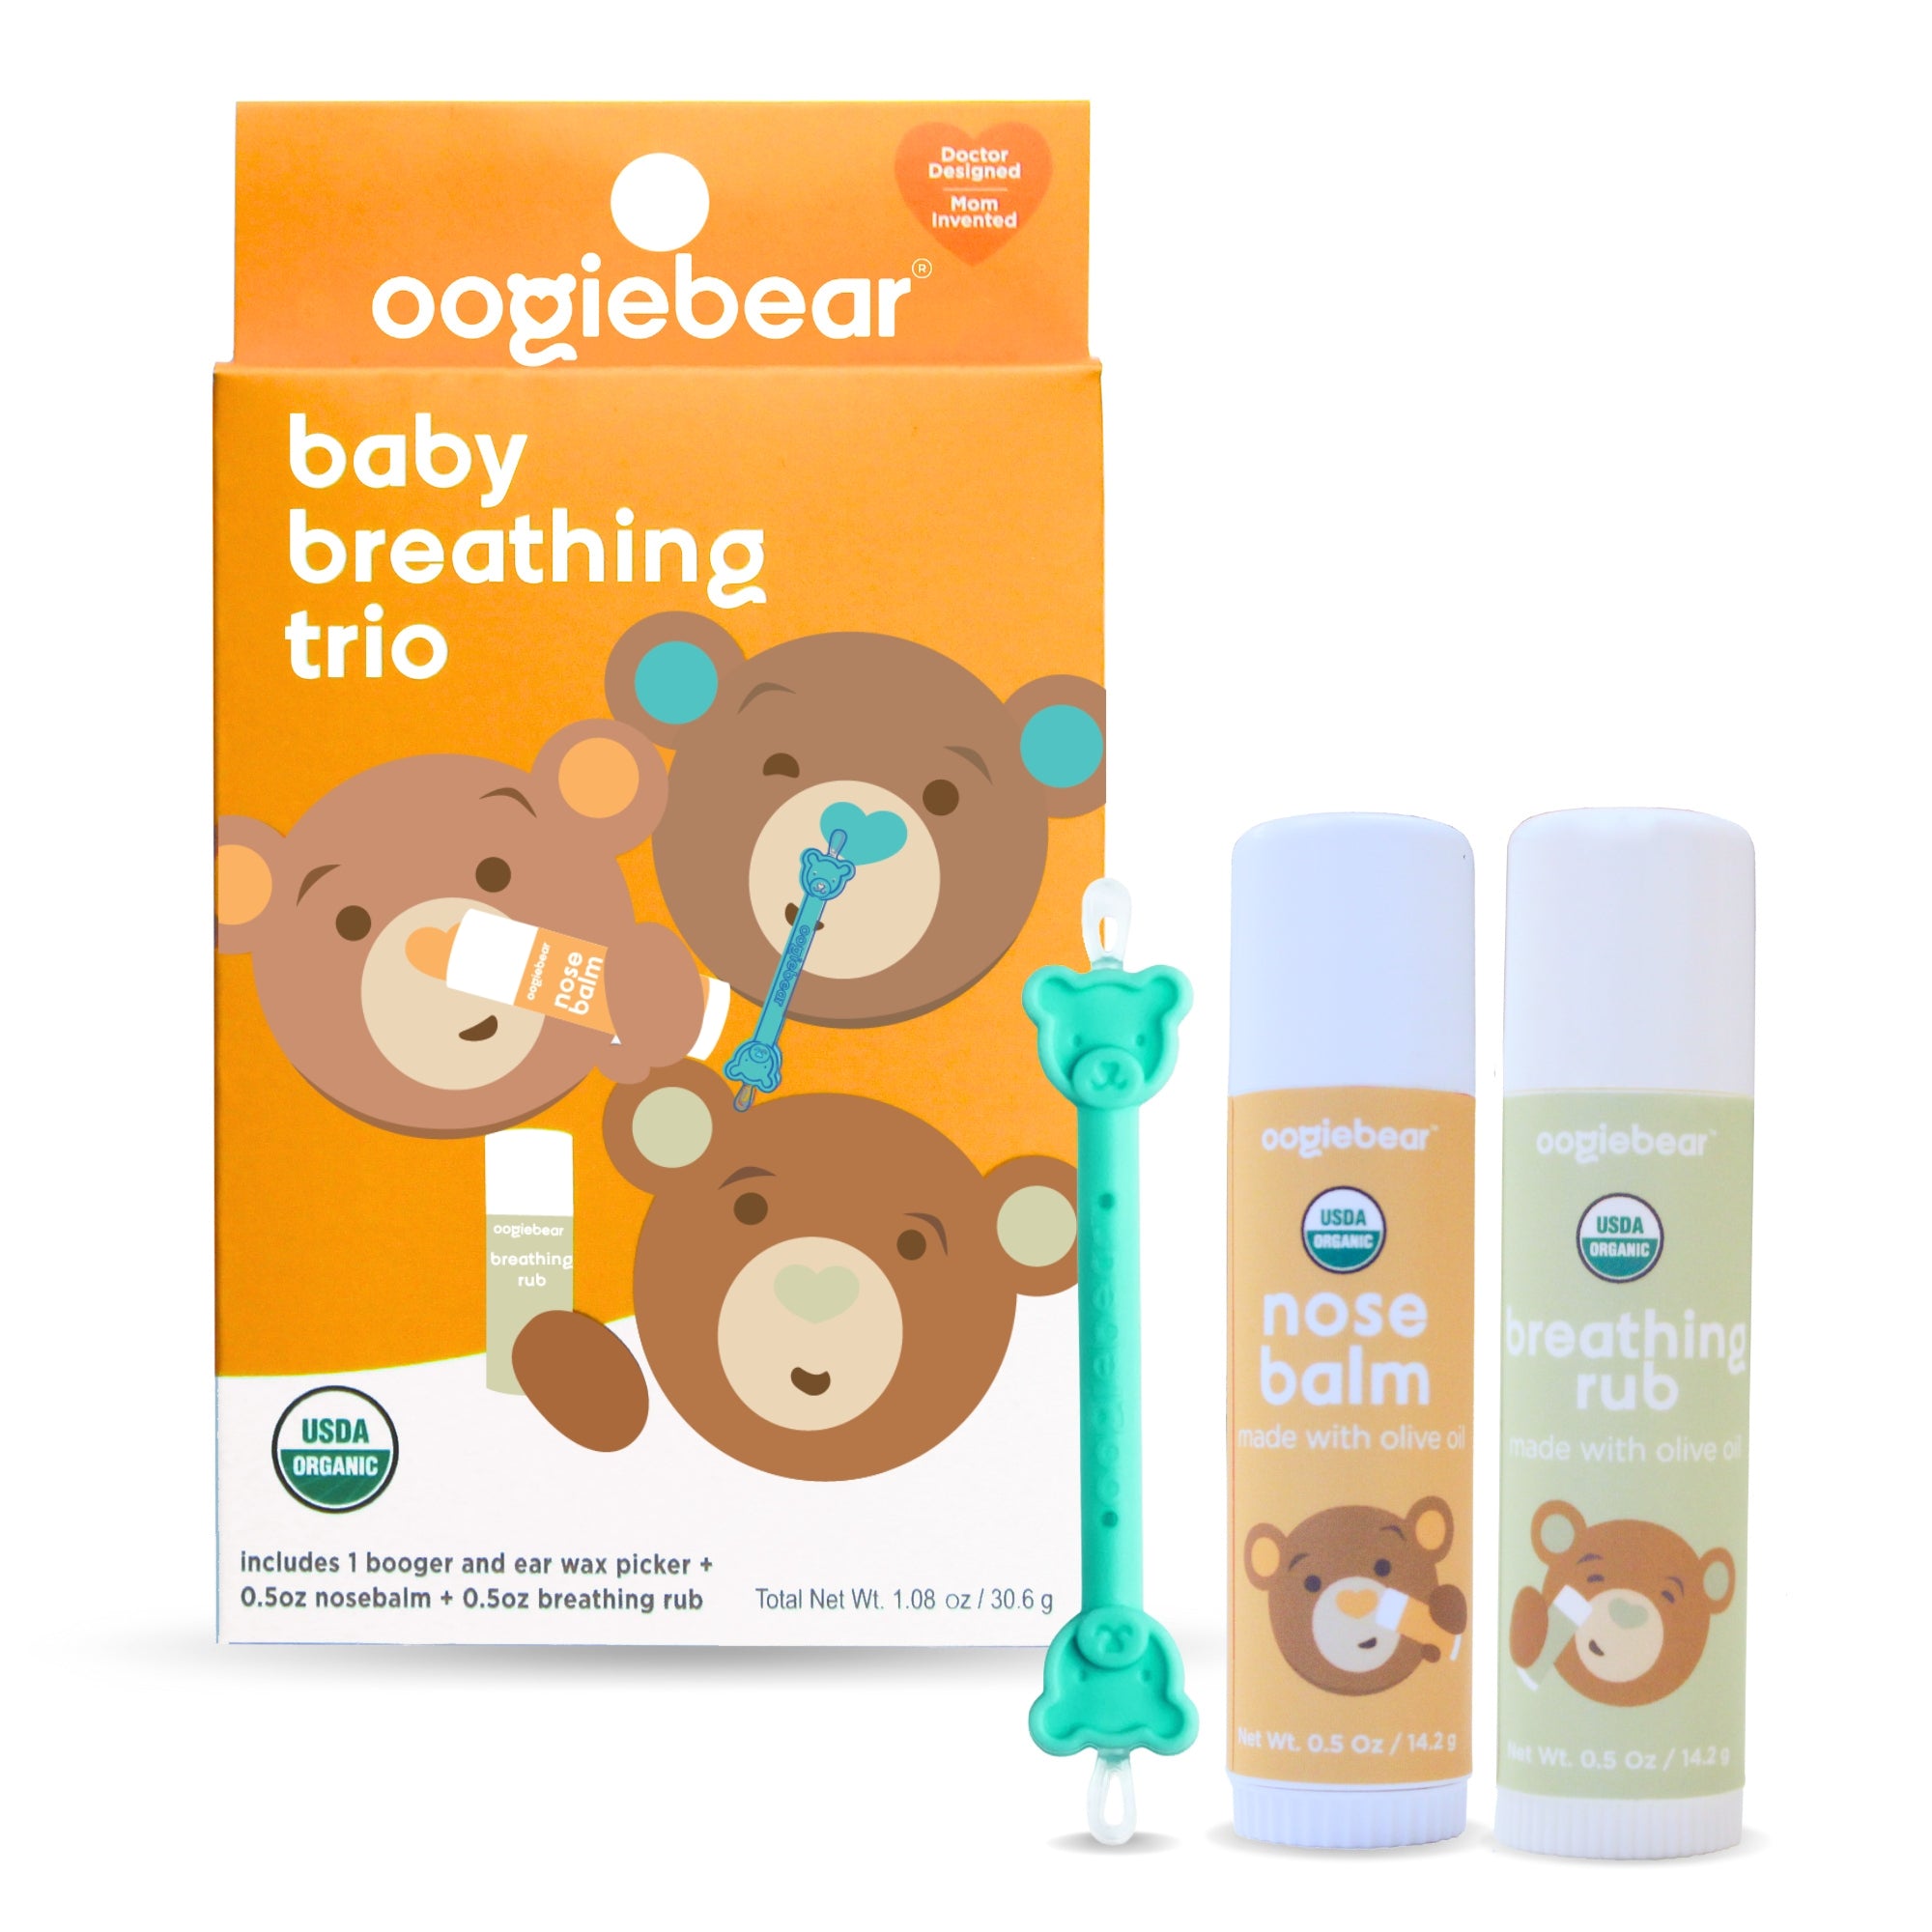 oogibear breathing trio perfect for sick or congested babies